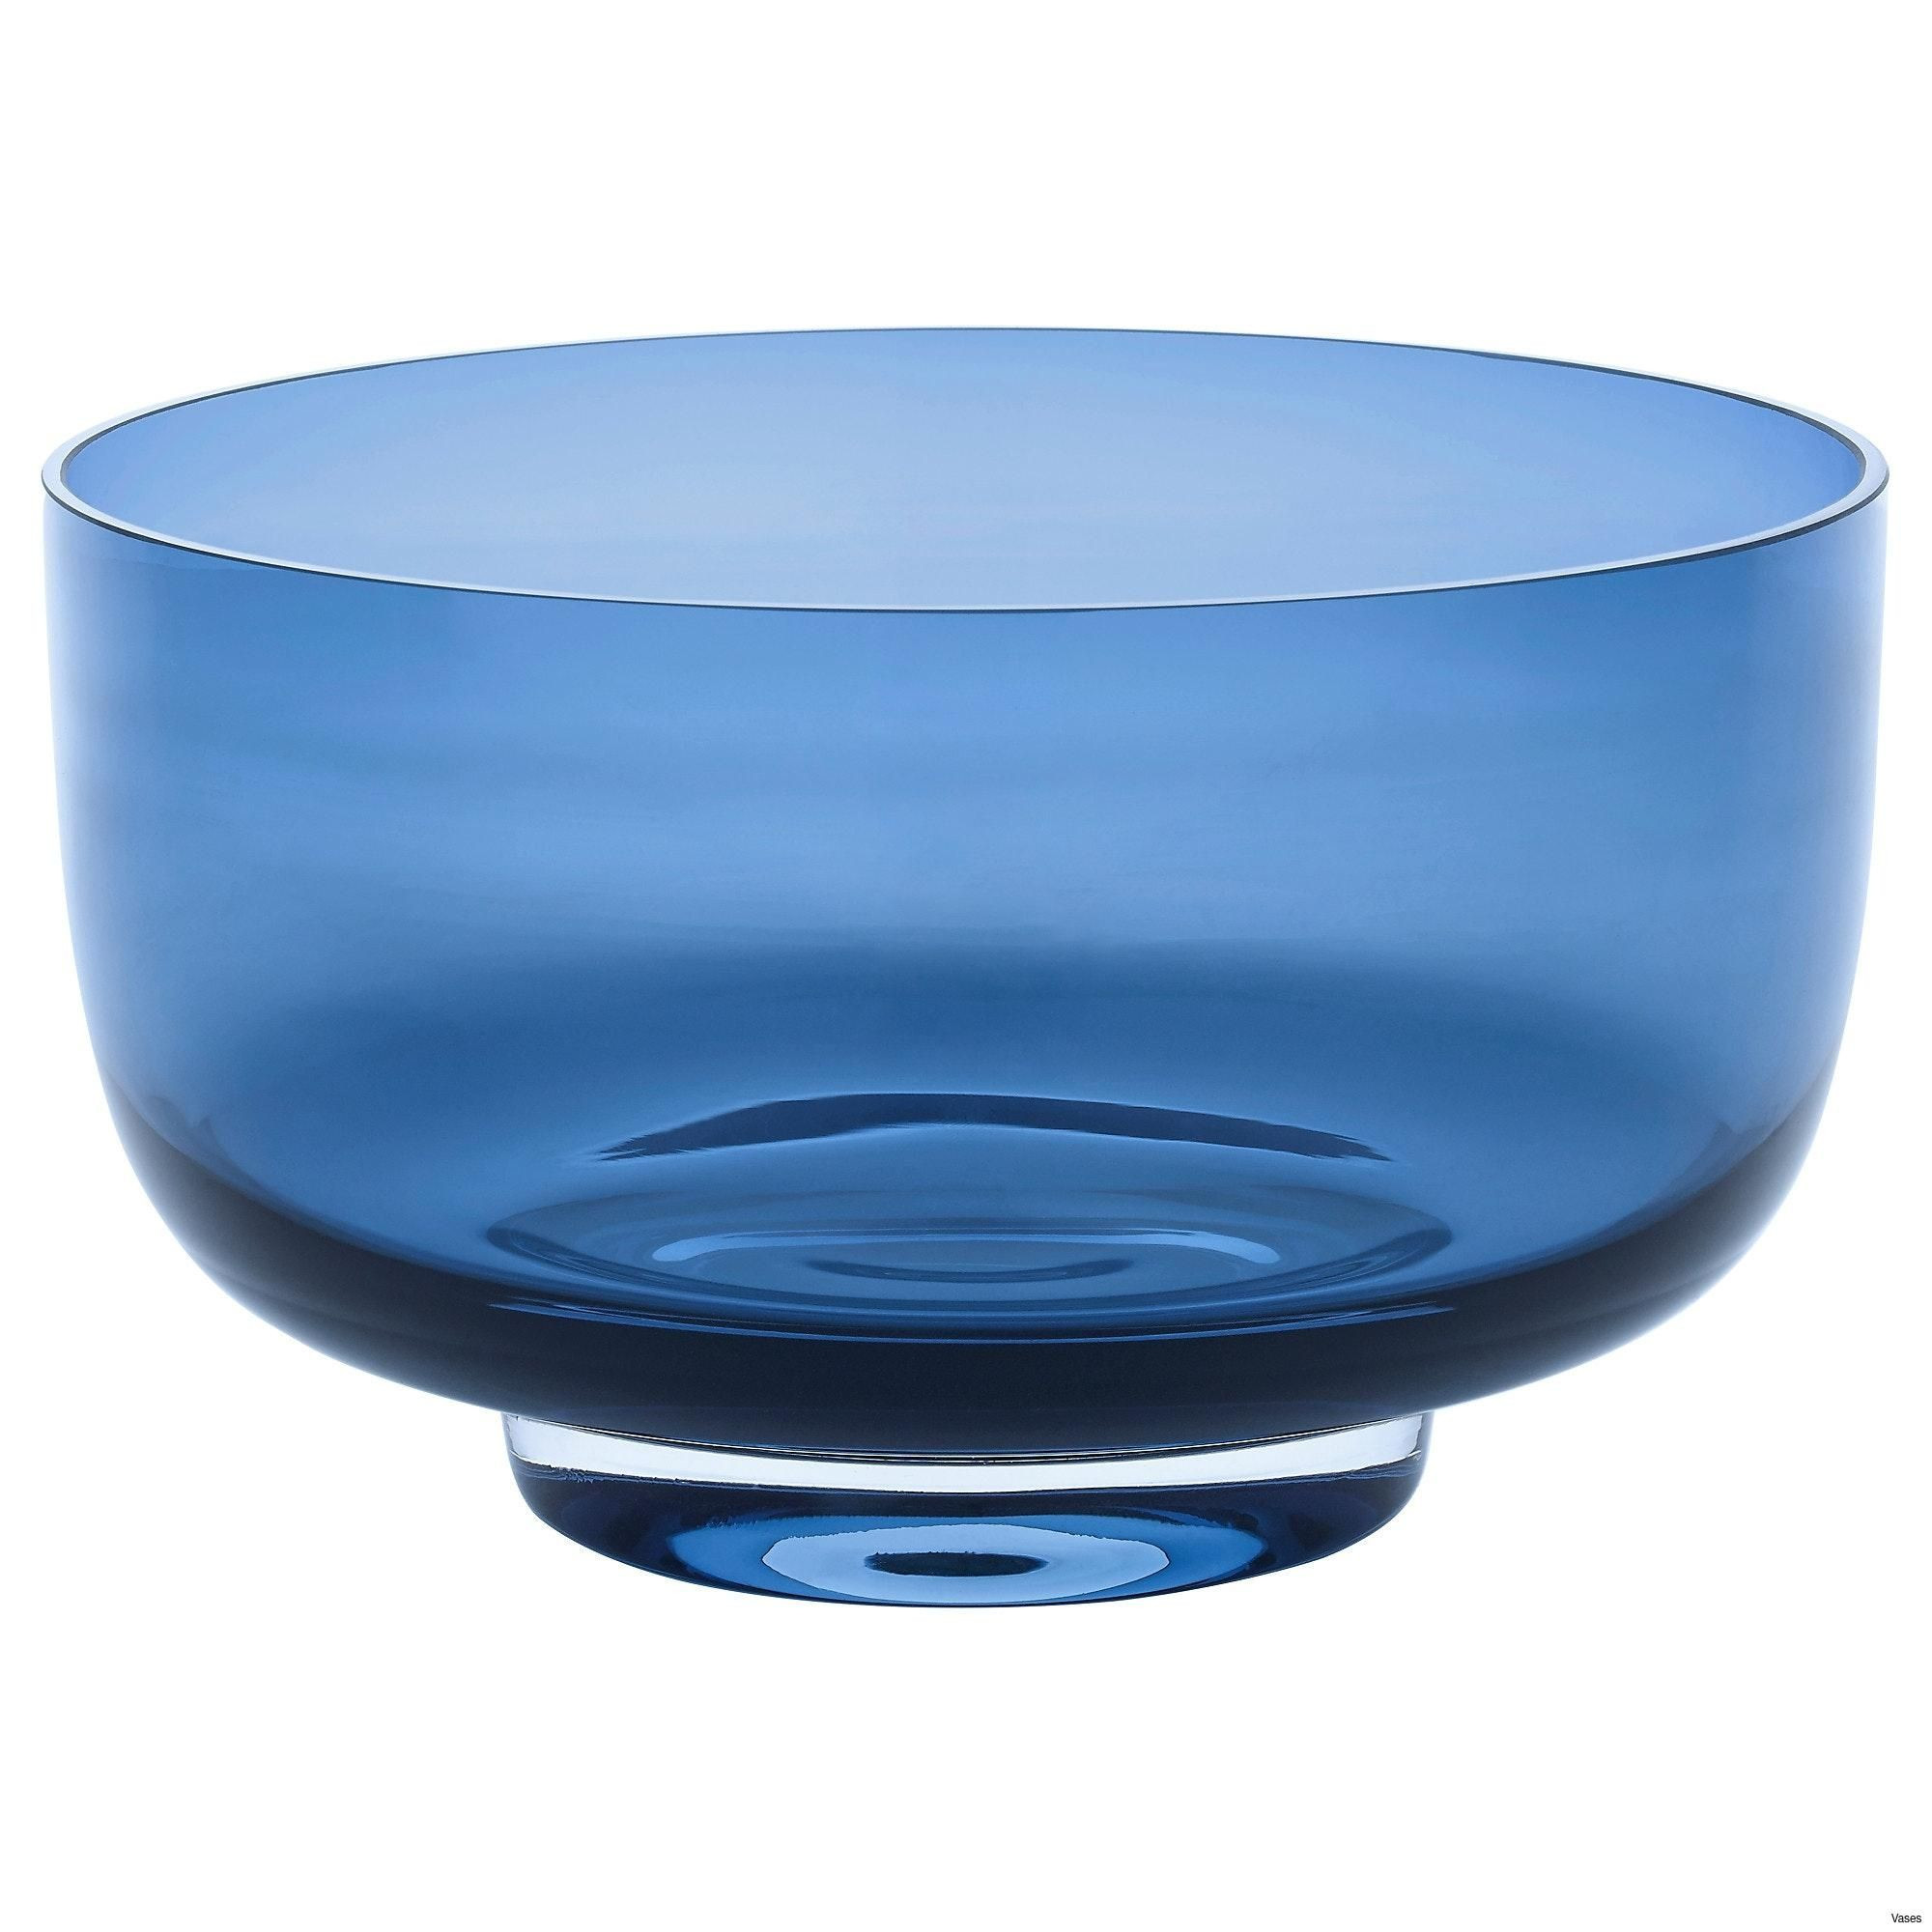 19 Recommended Galle Vase for Sale 2024 free download galle vase for sale of art glass vase luxury decorative glass bowl new living room ikea for art glass vase luxury decorative glass bowl new living room ikea vases awesome pe s5h